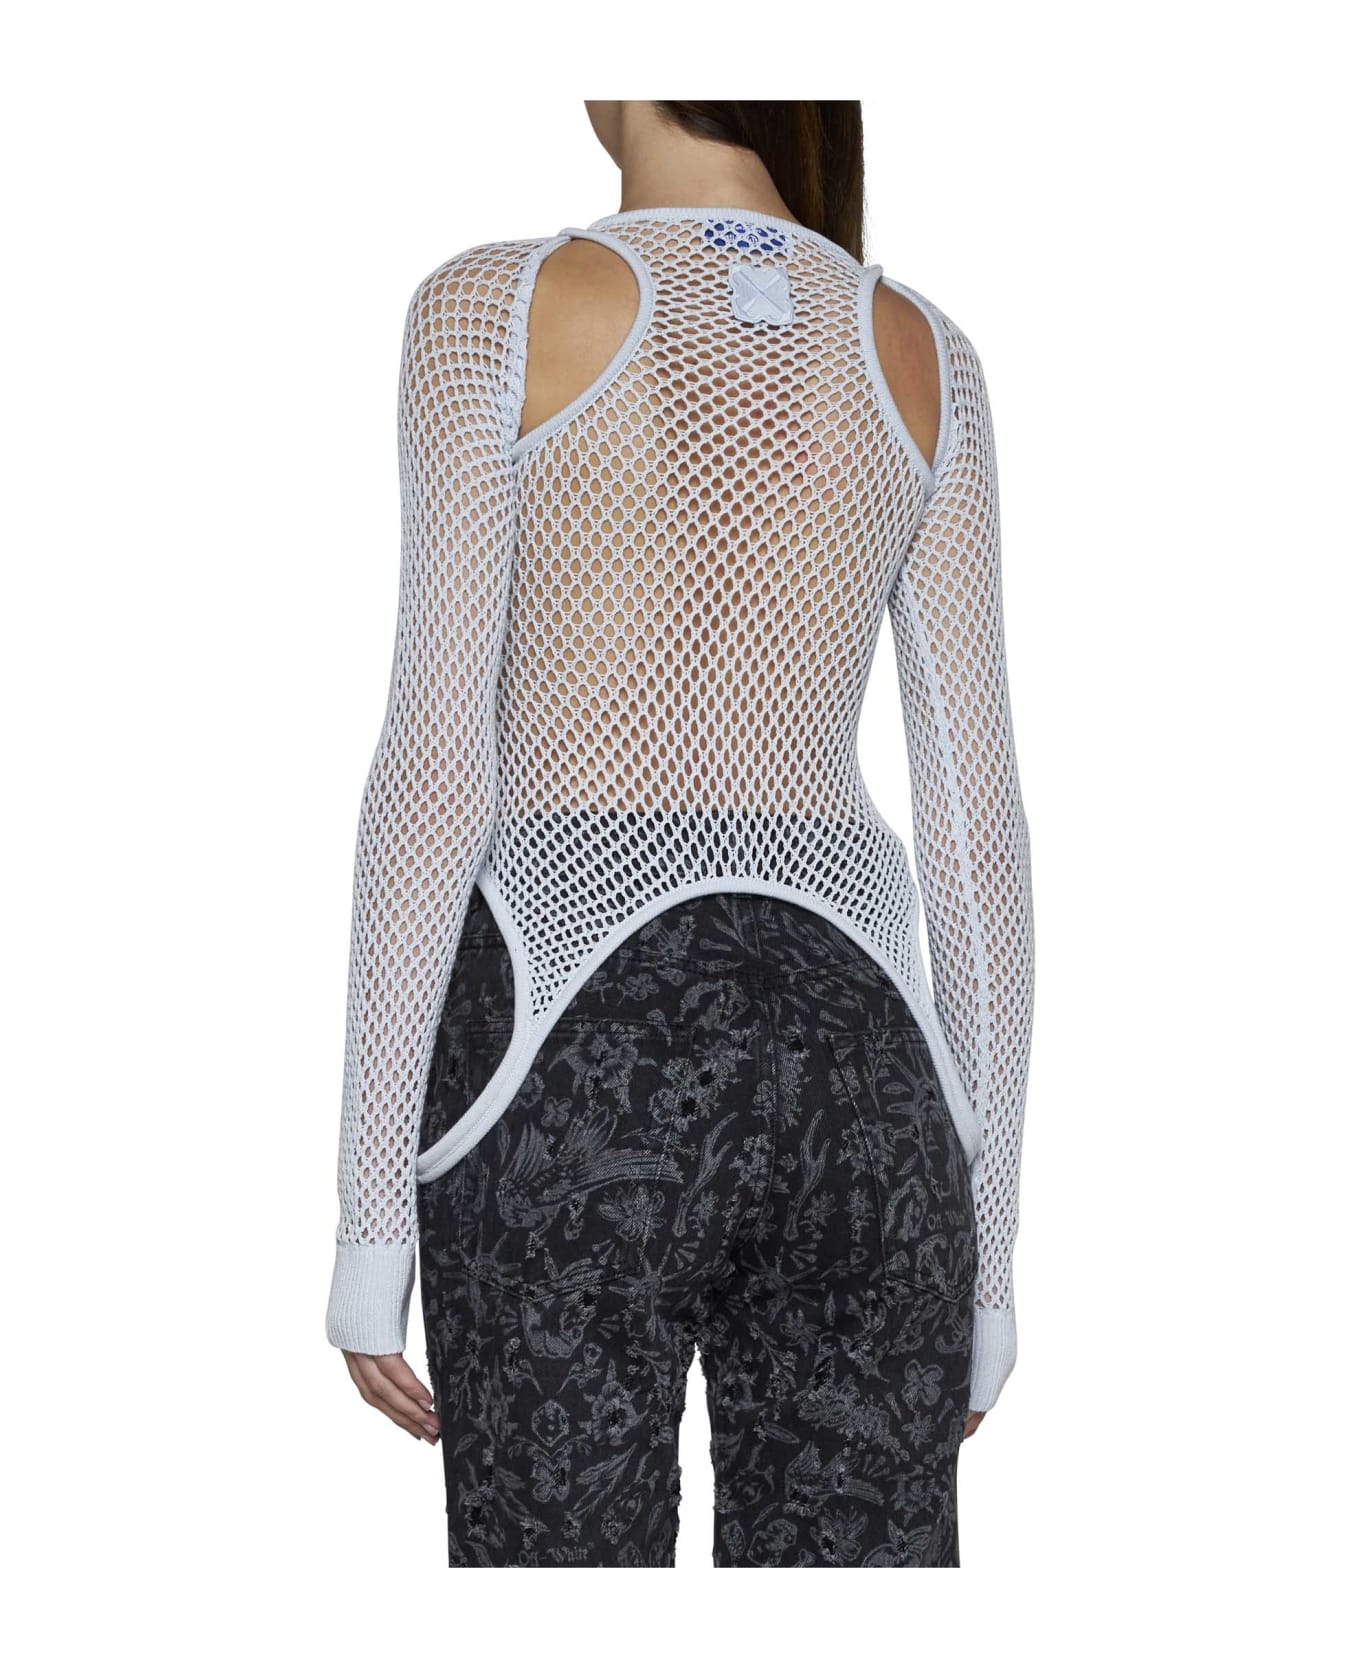 Off-White Ribbed And Mesh Knit Top - Artic ice white